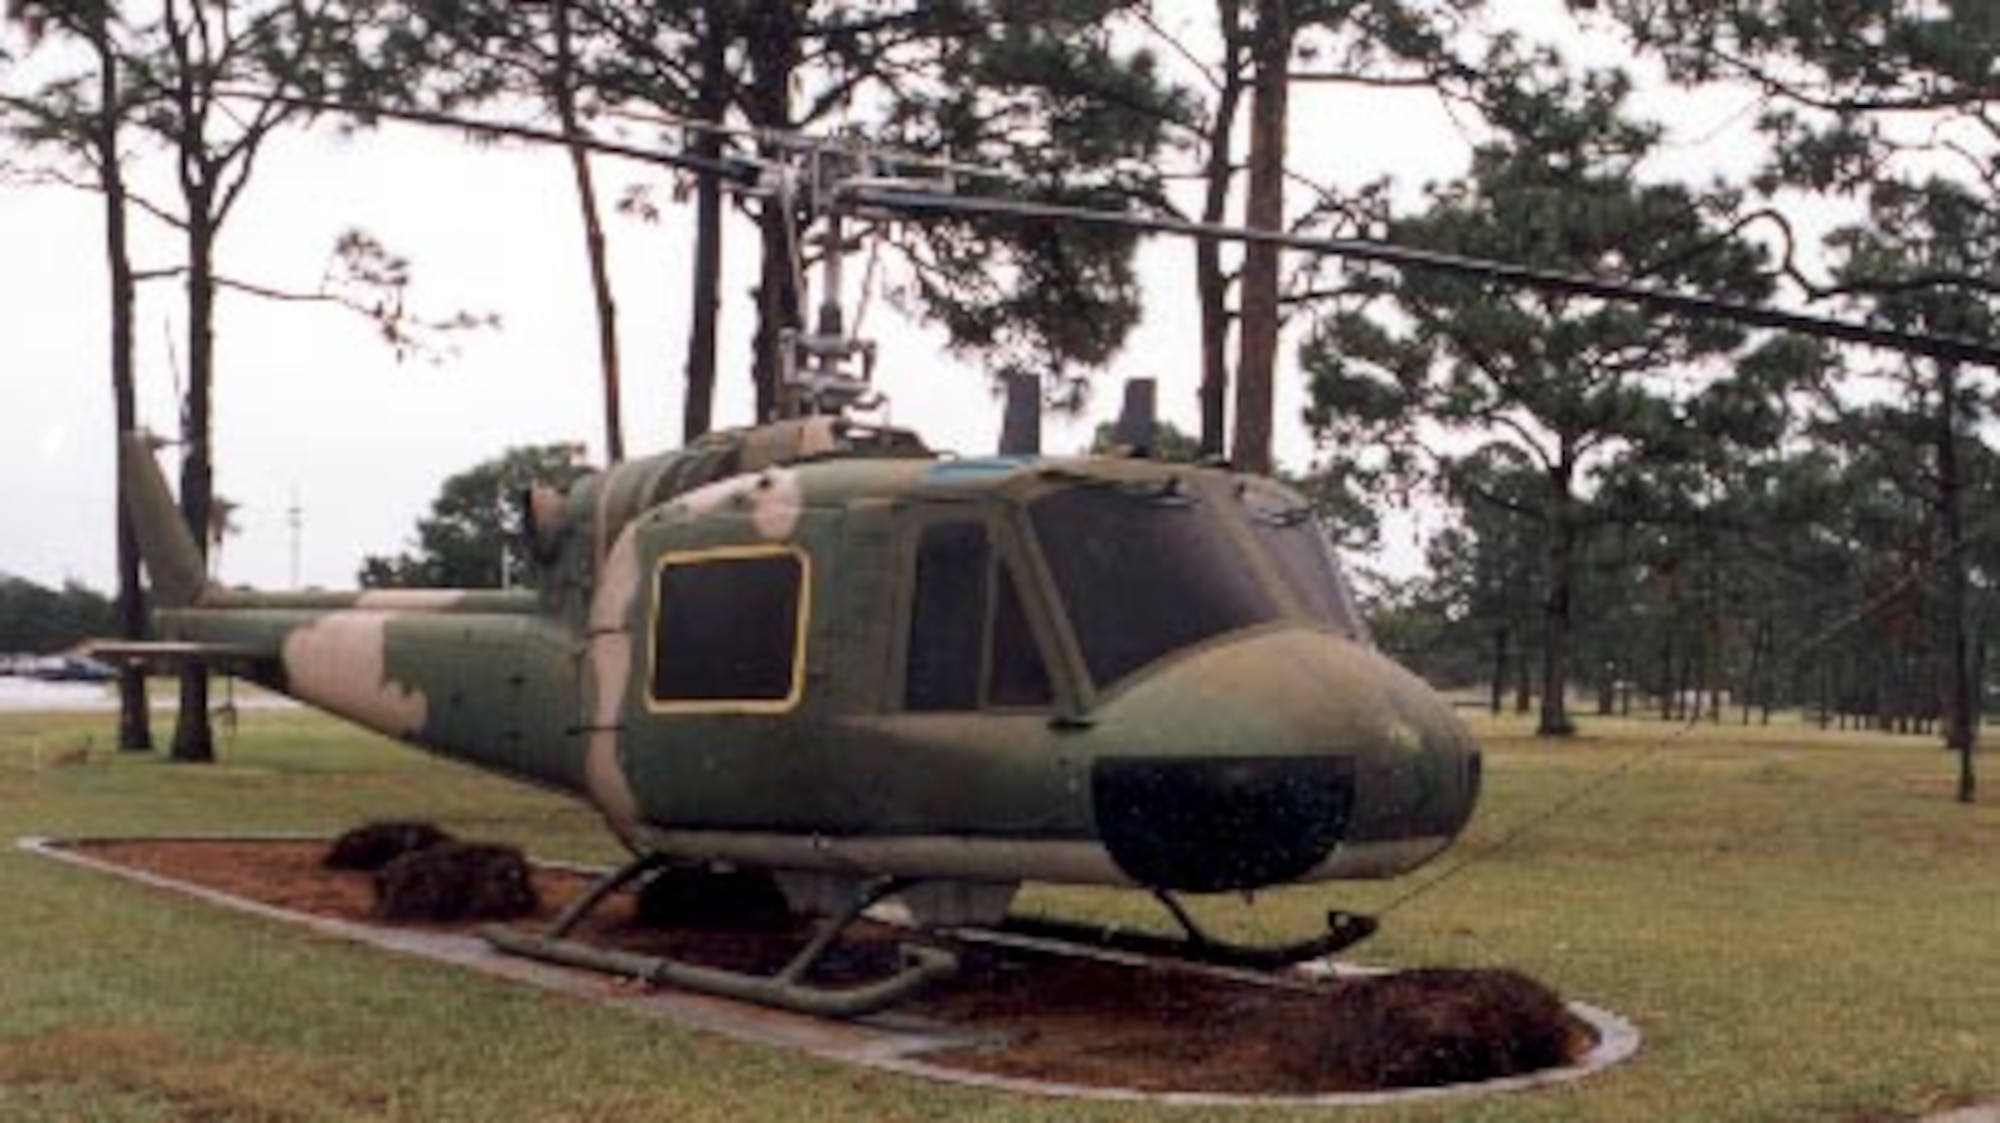 The Bell Iroquois, or the Huey, as it's better known, has been the most popular light utility helicopter ever produced. Bell produced two major versions of the UH-1 - the single engine Models 204 and 205 and the twin engine Models 212 and 412. Although both were UH-1s, there were enough differences to warrant considering them two separate aircraft. The H-1 series began as the Bell XH-60 to meet an Army requirement for a utility helicopter for front-line evacuation of casualties.